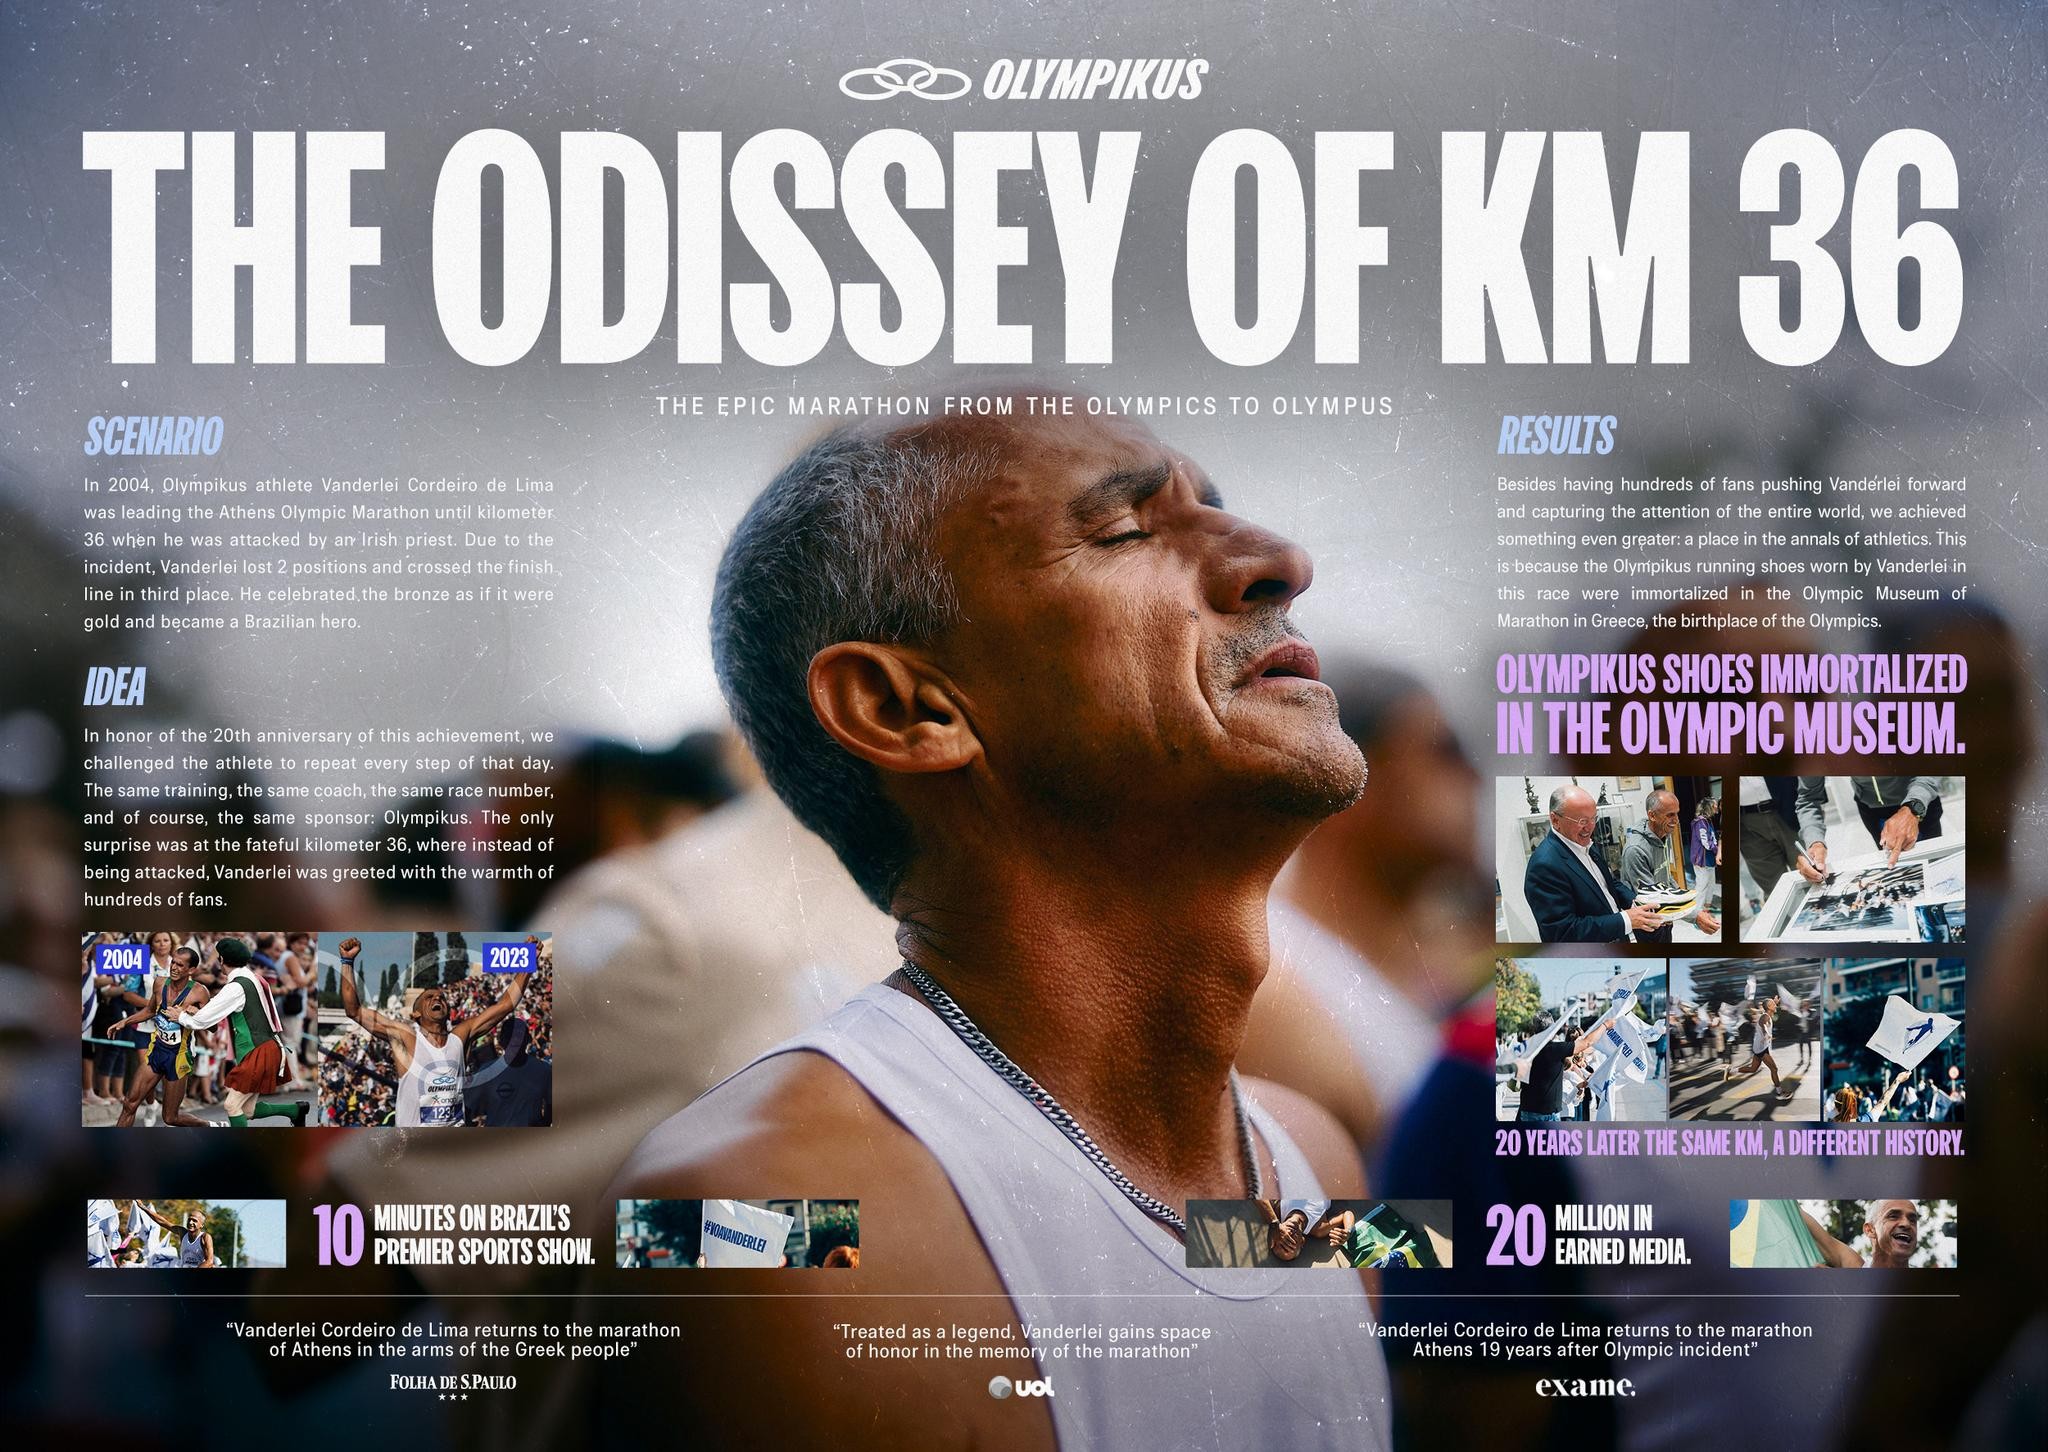 The Odissey of Km 36